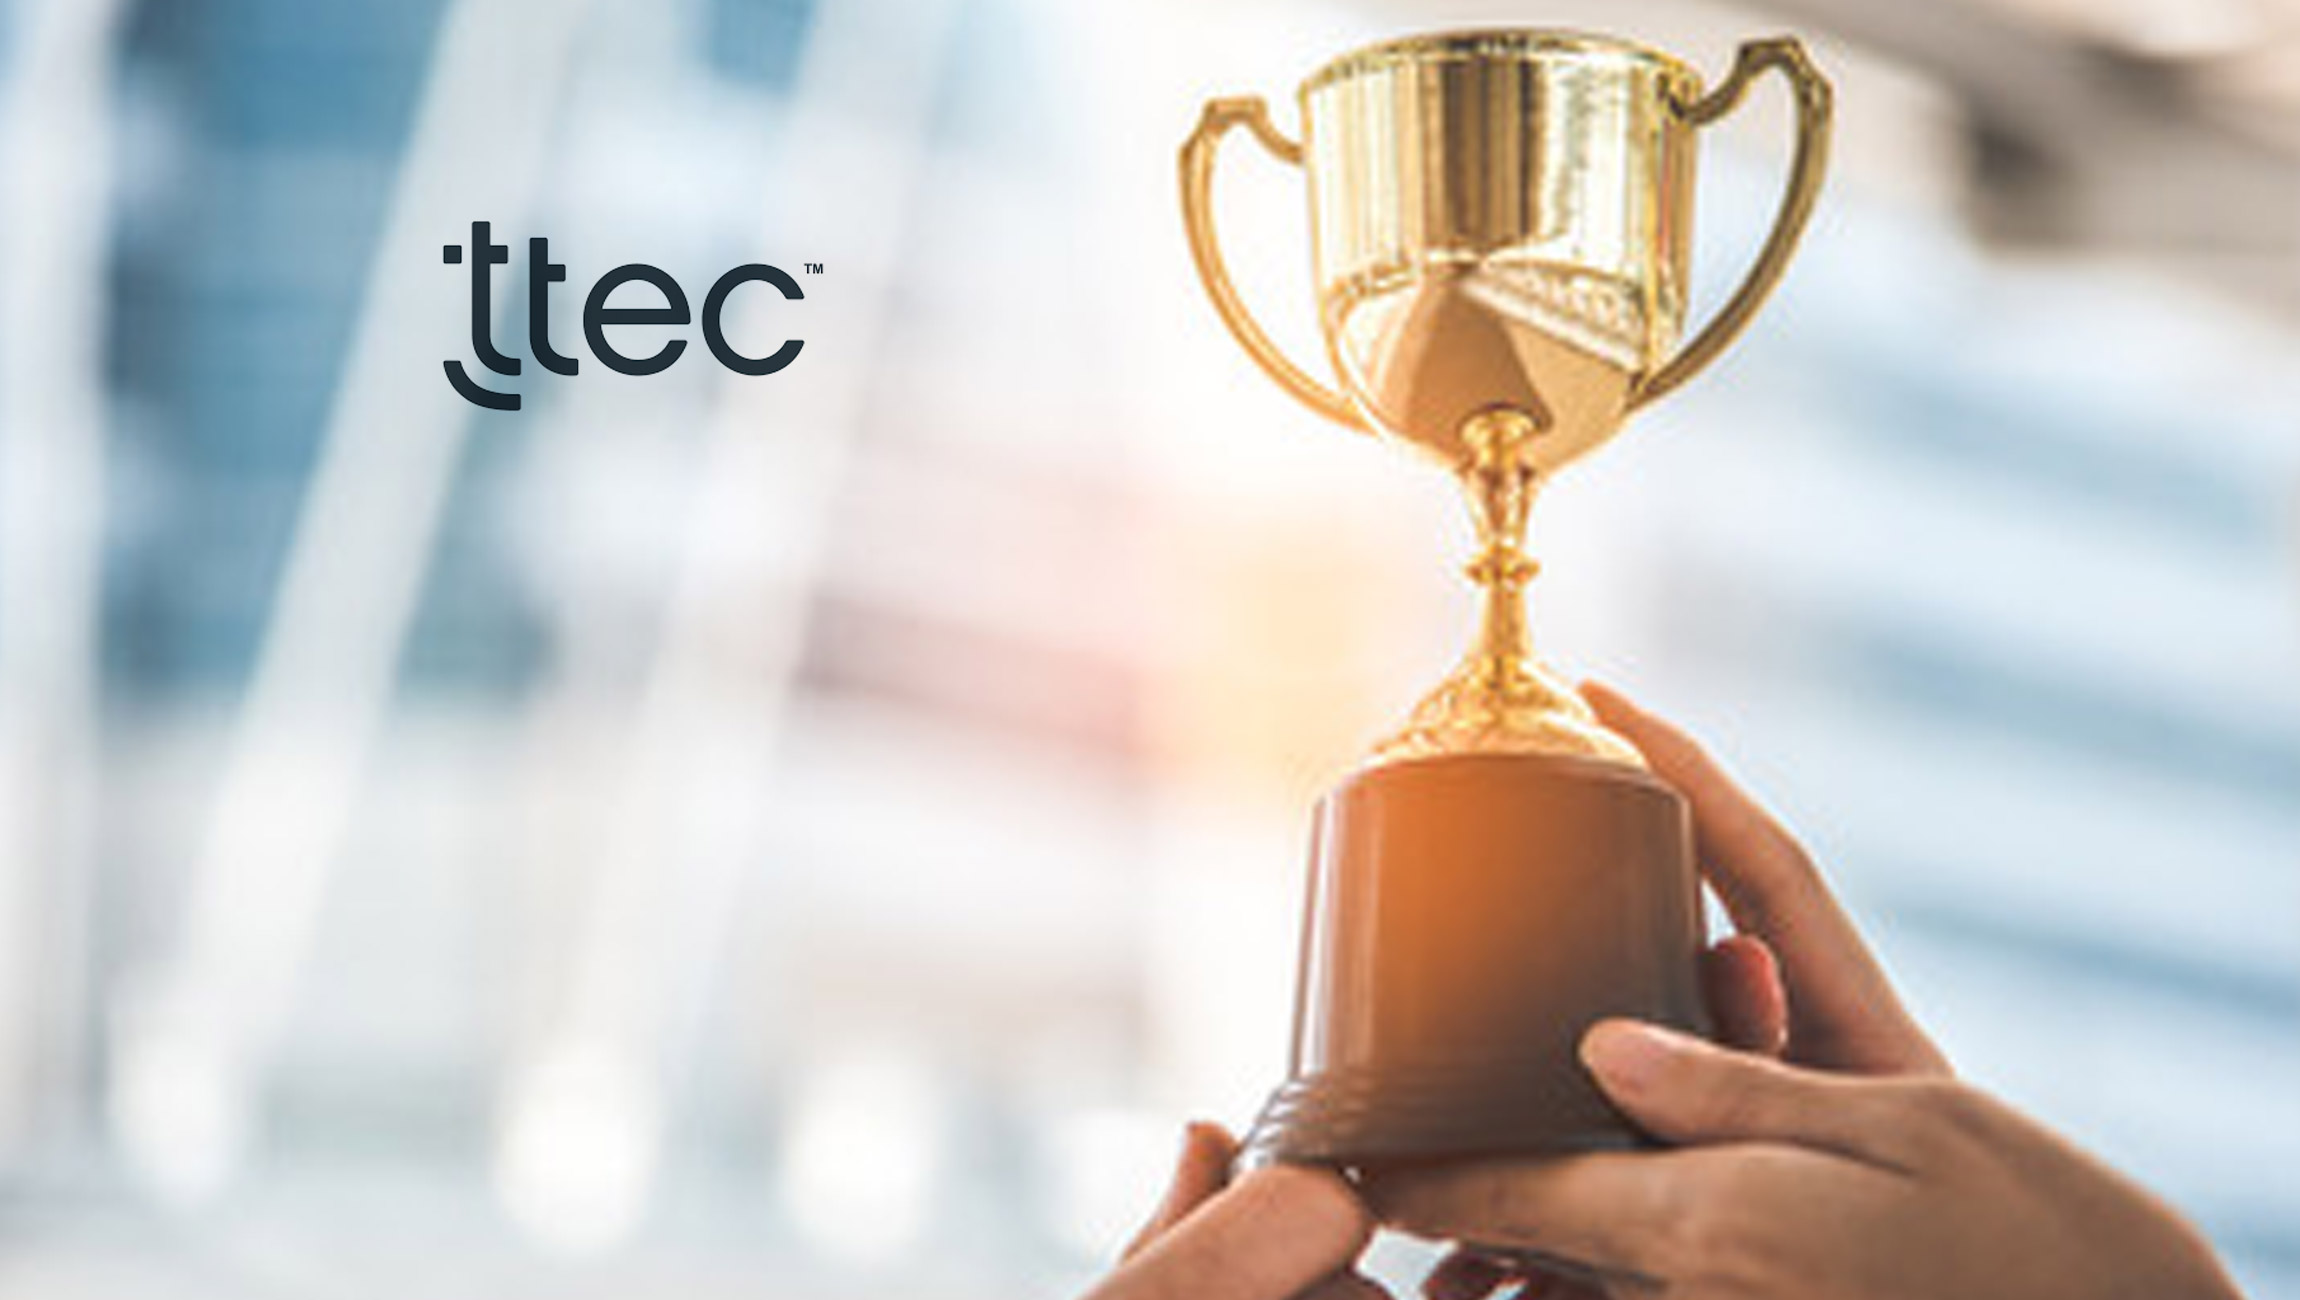 TTEC Wins Gold for 2022 Stevie Awards for Sales and Customer Service